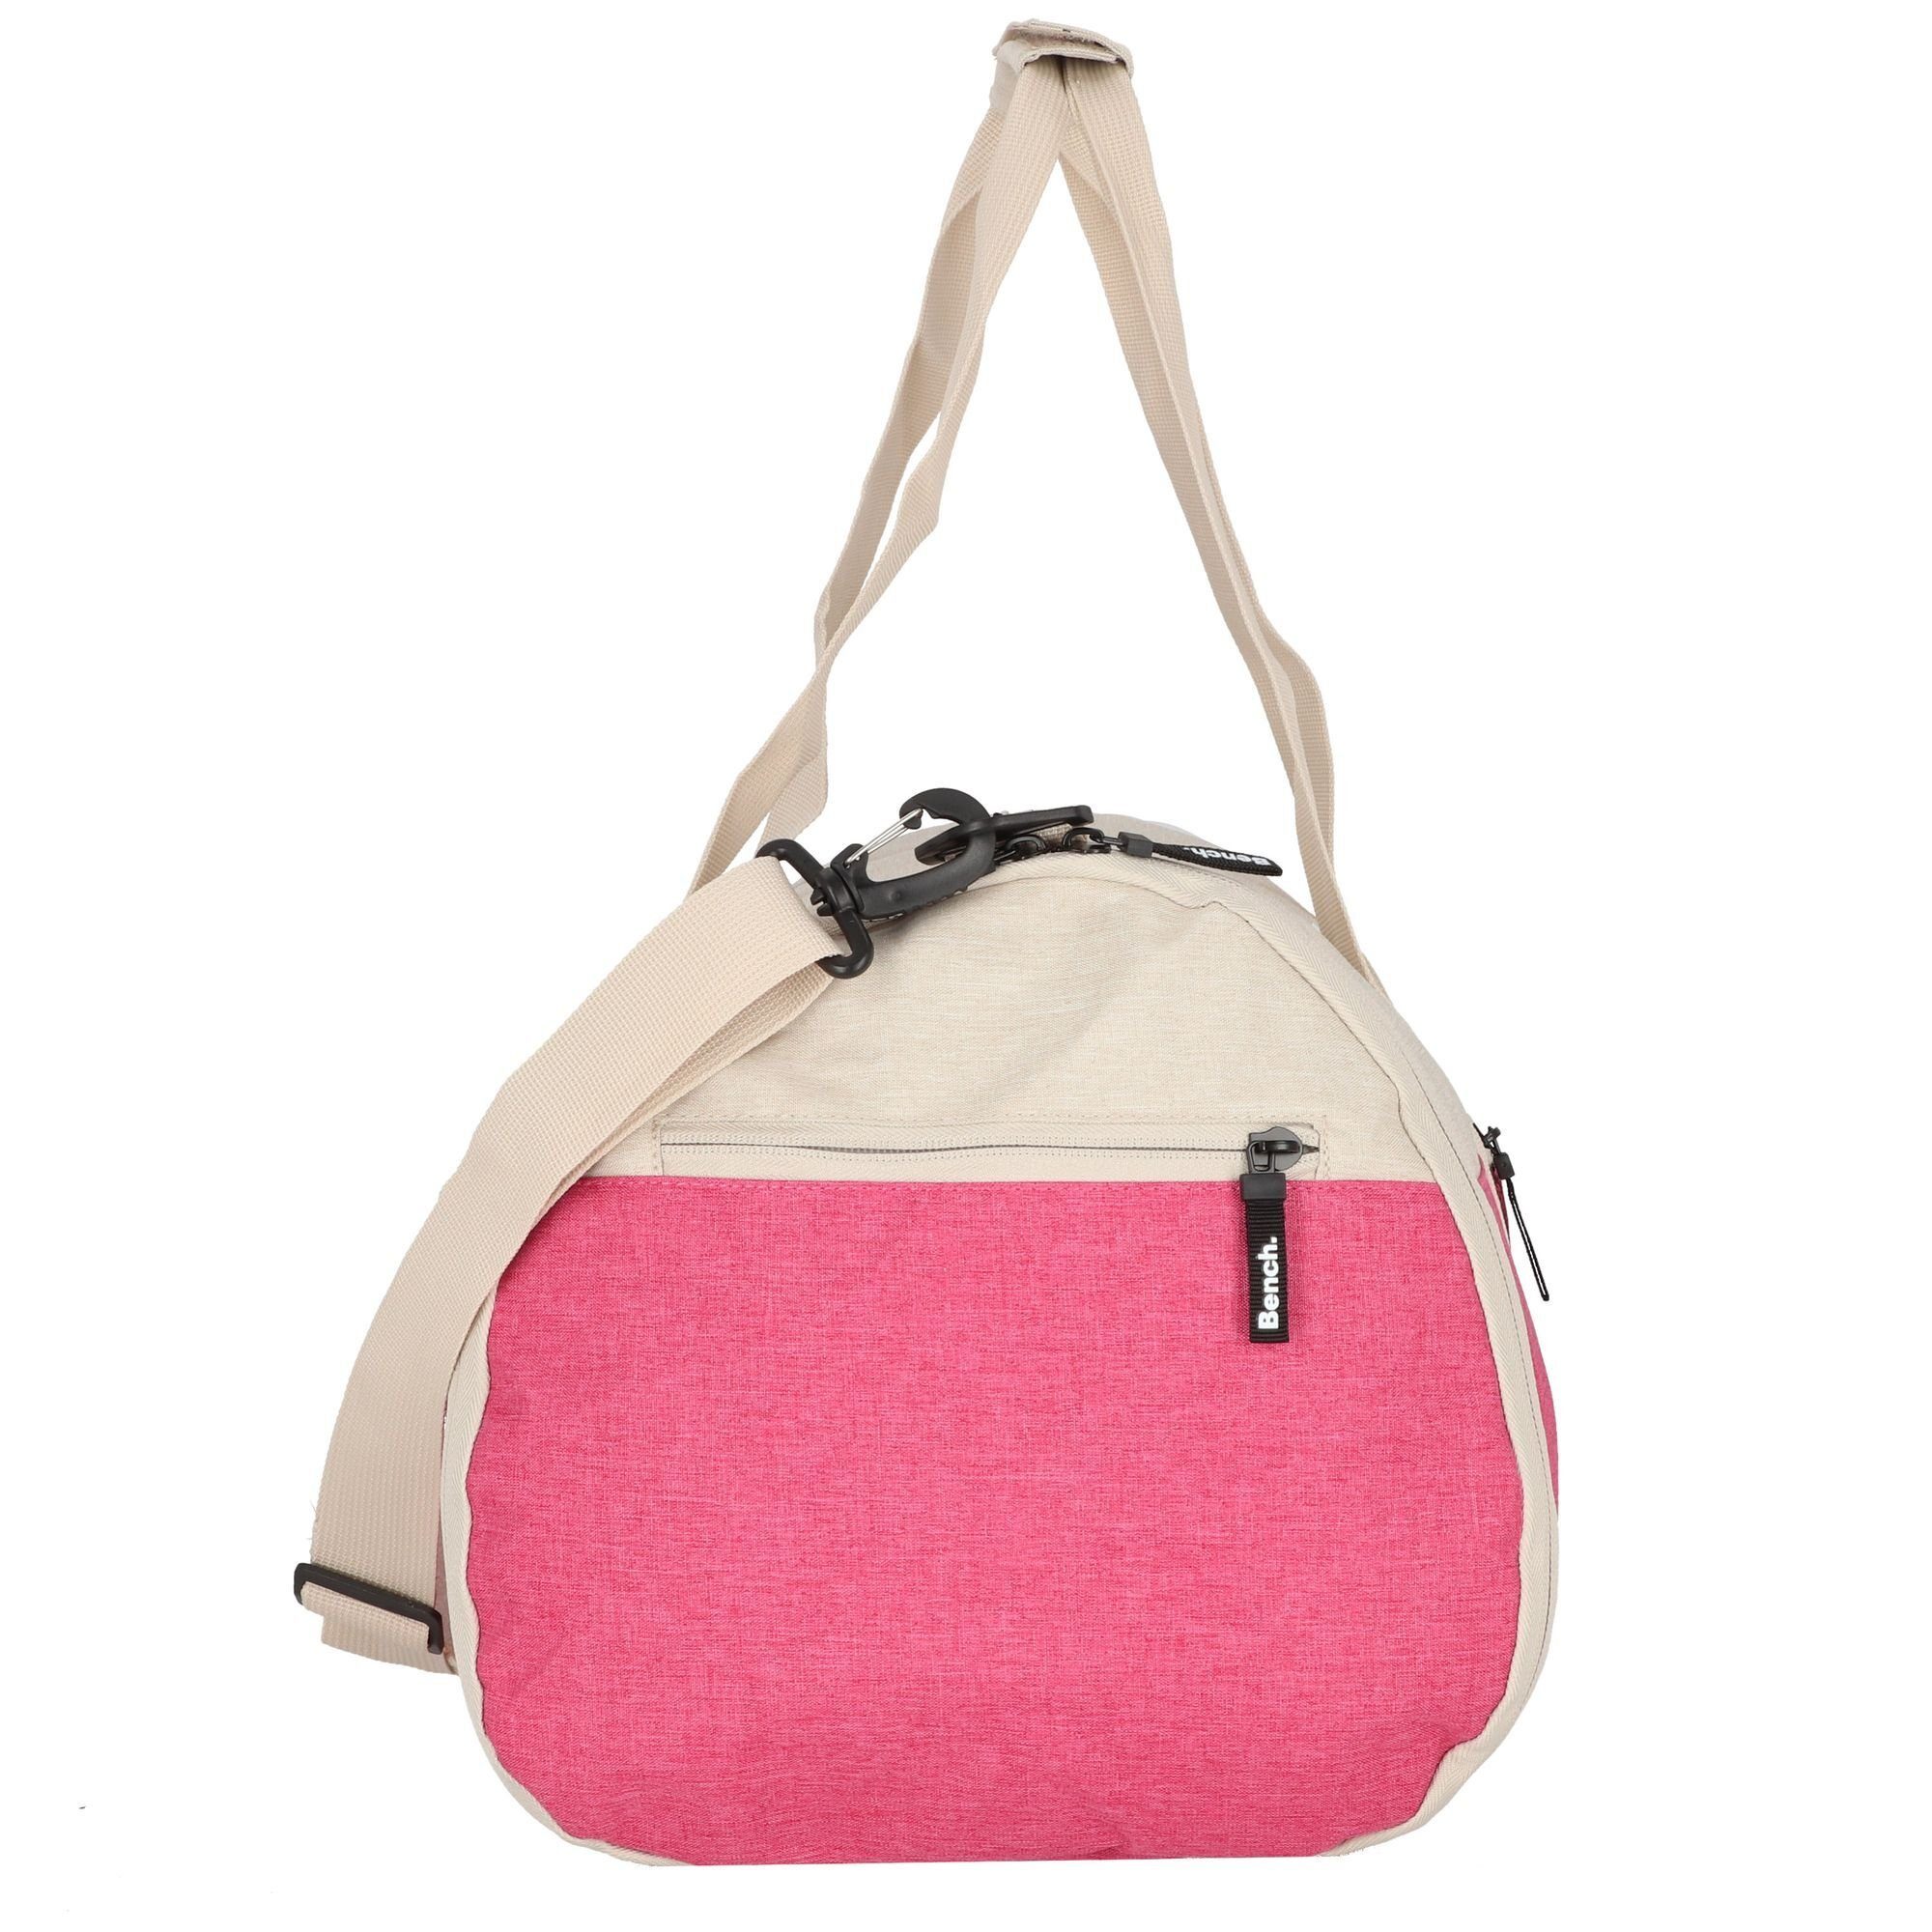 Bench. Weekender Classic, Polyester pink-sand